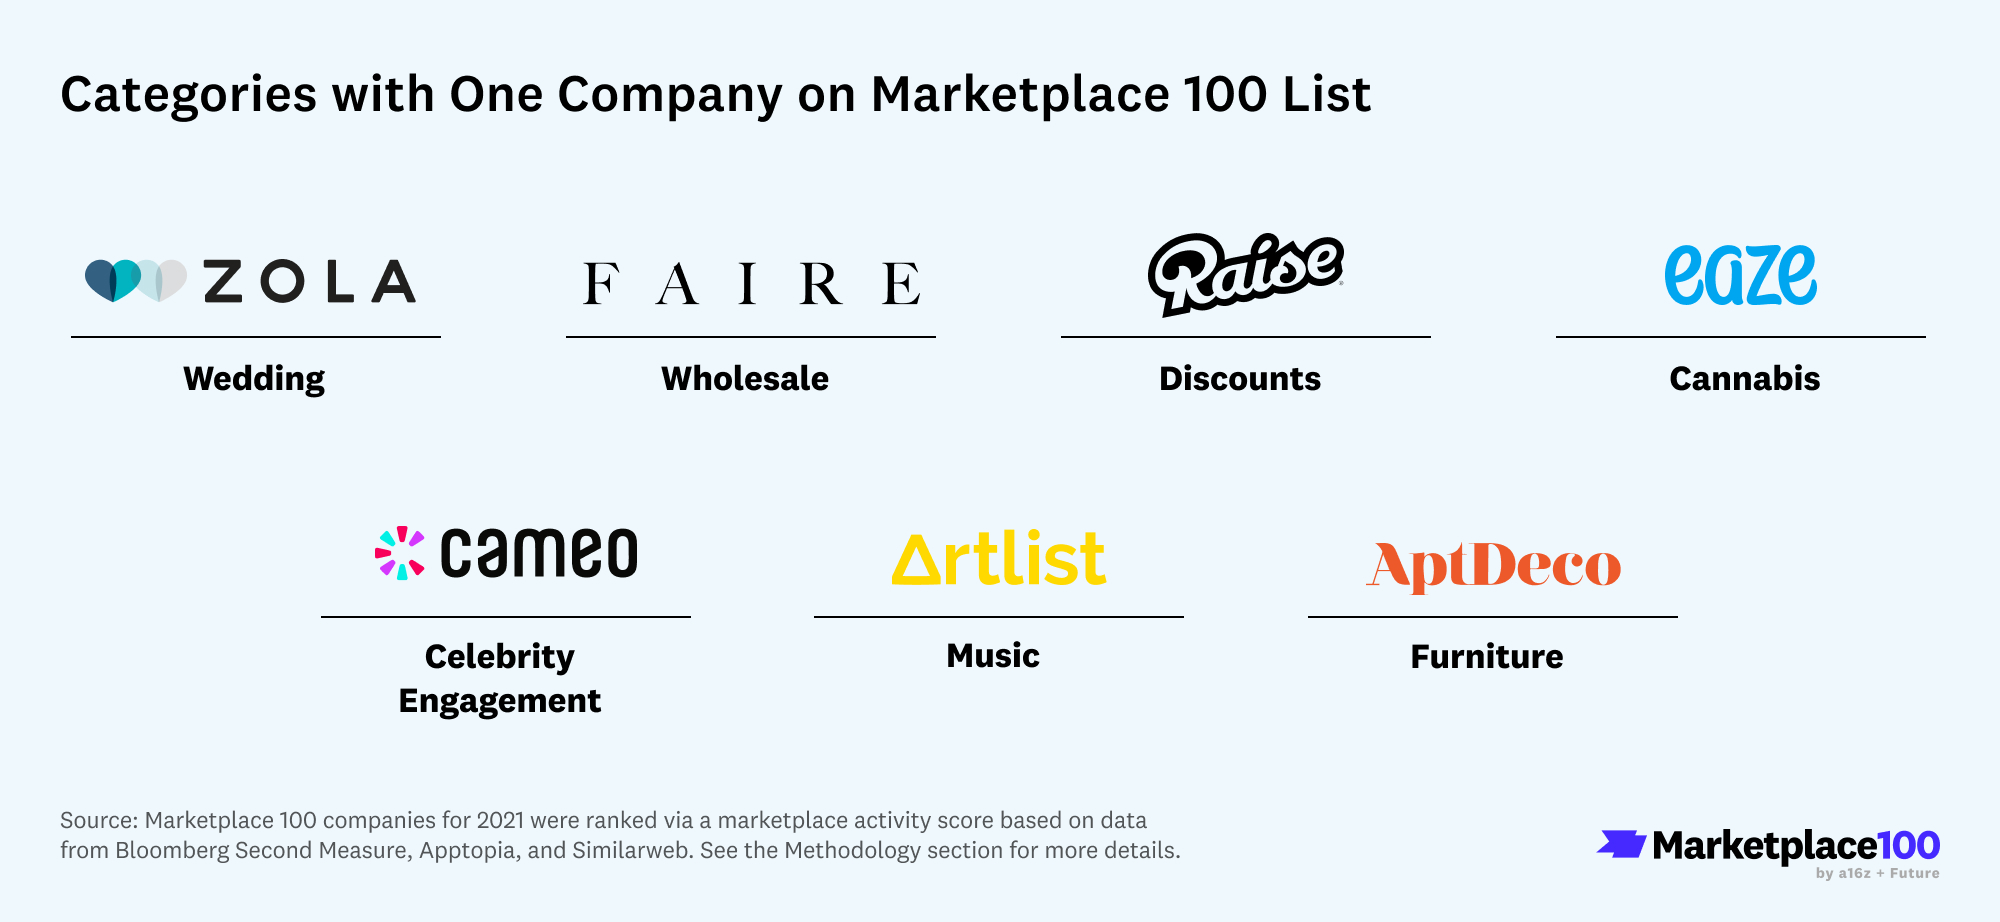 Categories with one company in the Marketplace 100